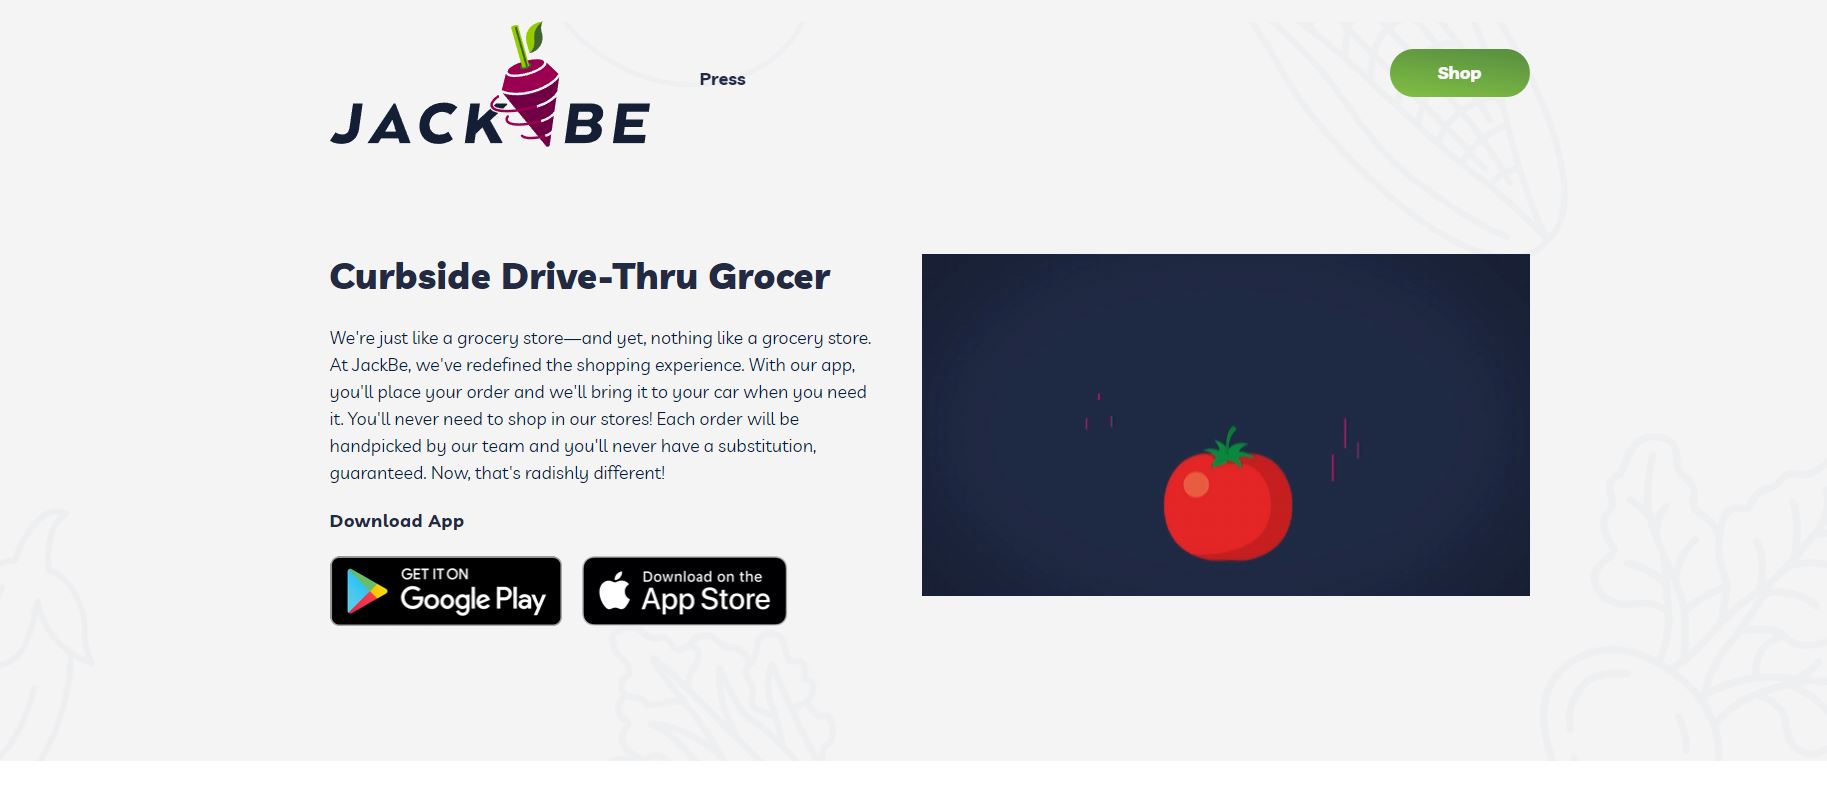 With $11.5M in funding, JackBe is changing the grocery game one order at a time